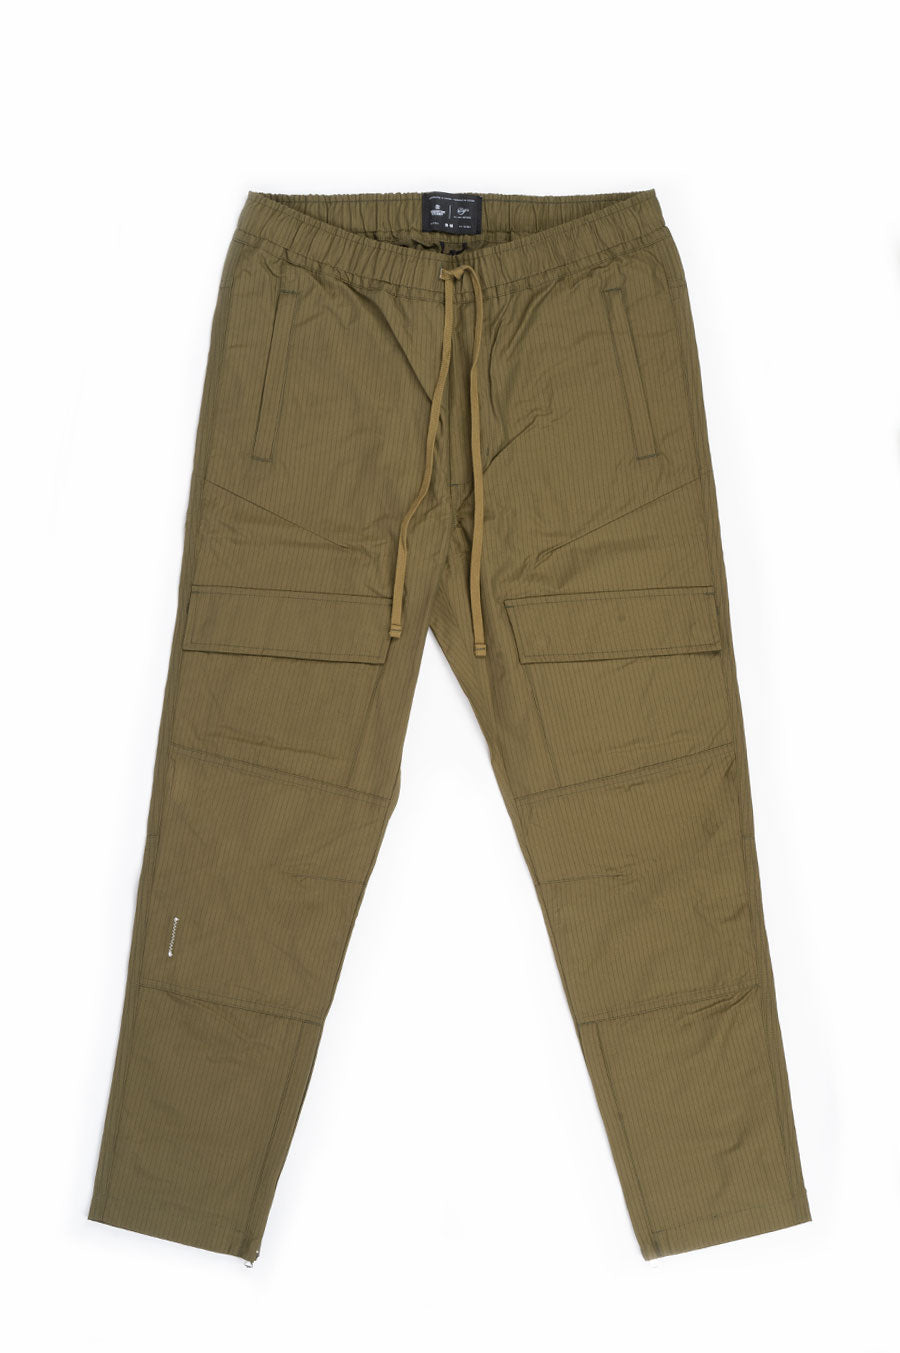 CARGO BLENDS PANT S04 – CHAMP MOSS REIGNING RIPSTOP